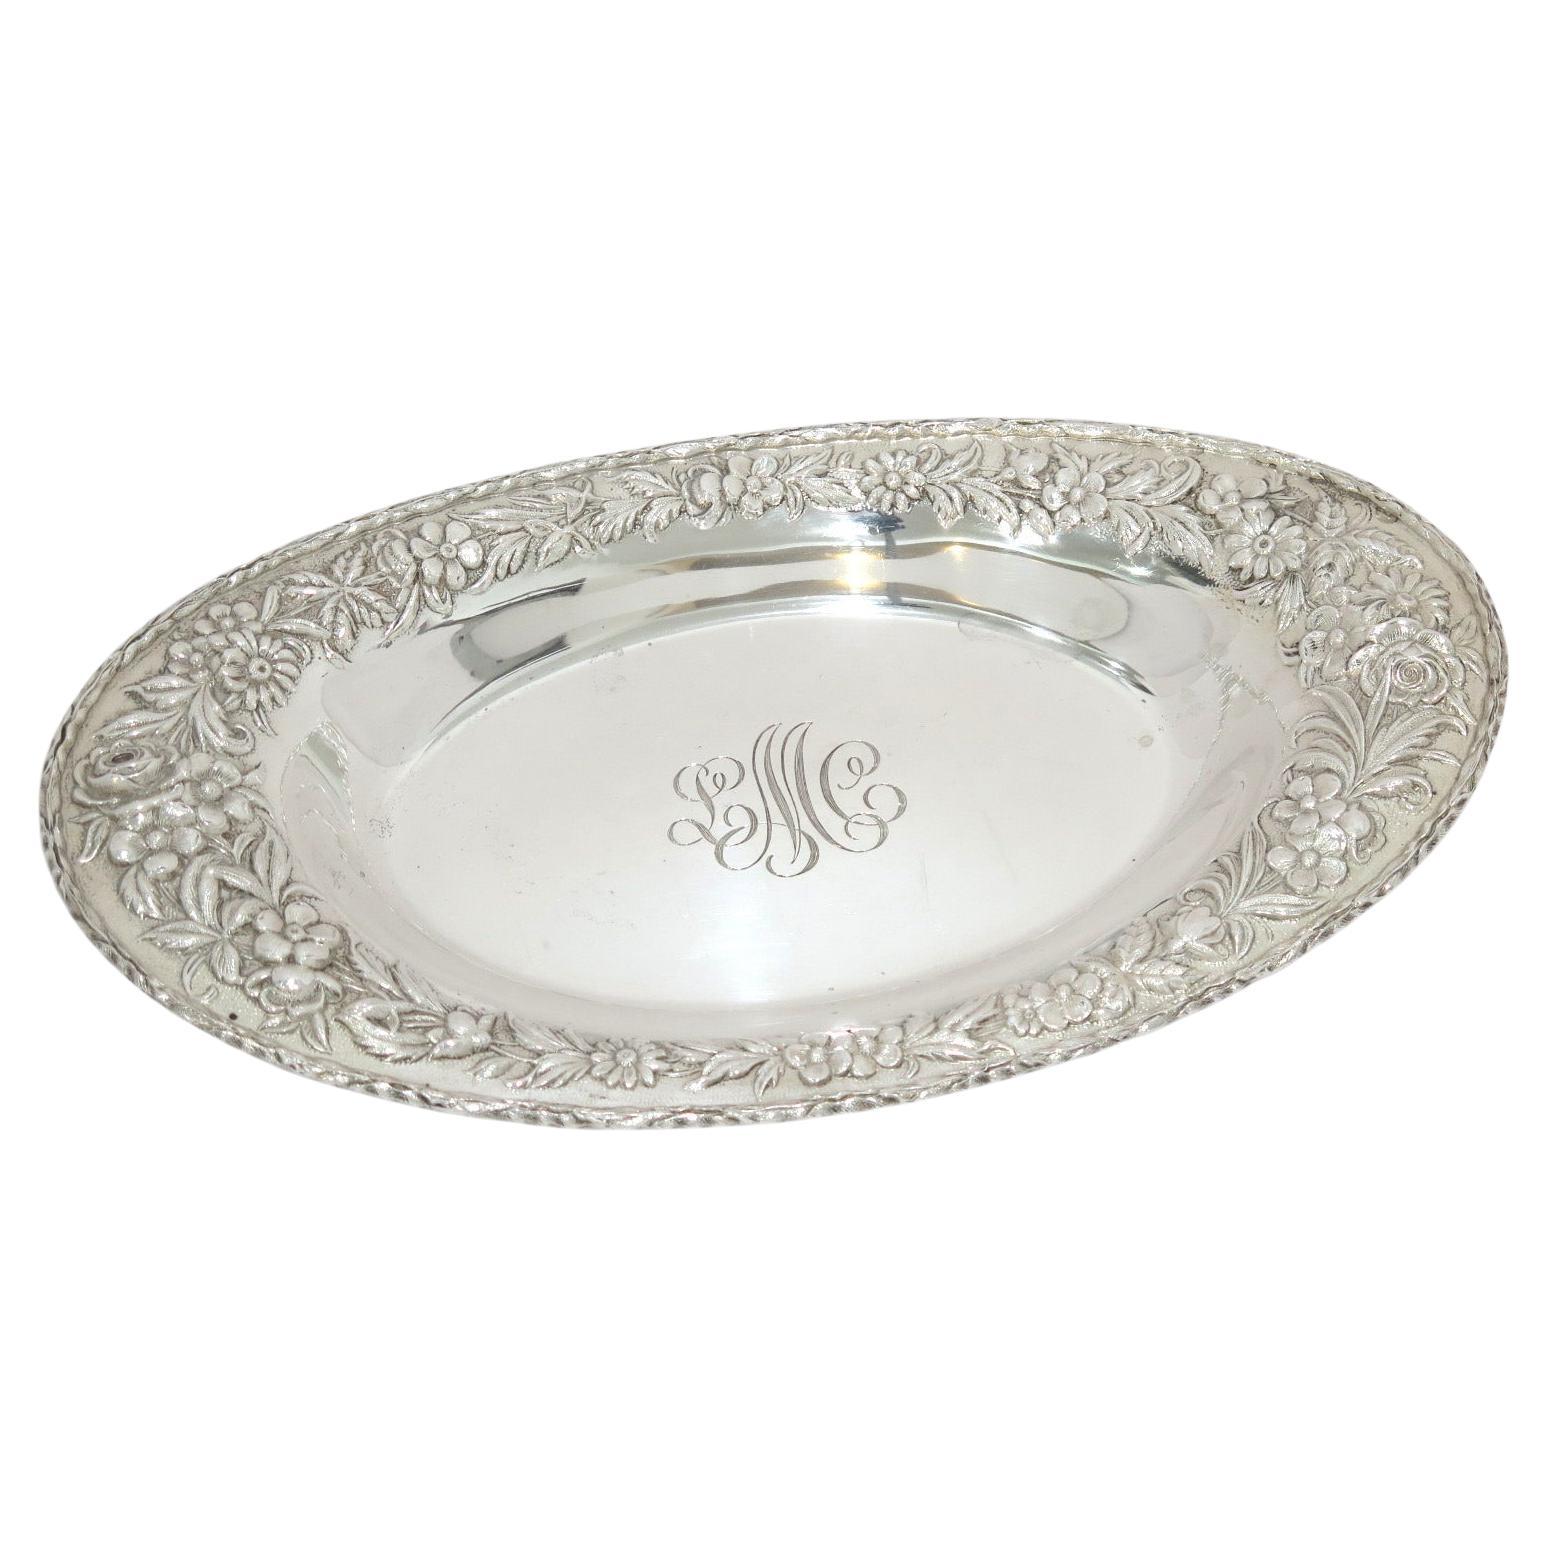 11.75 in - Sterling Silver S. Kirk & Son Antique Floral Repousse Oval Dish